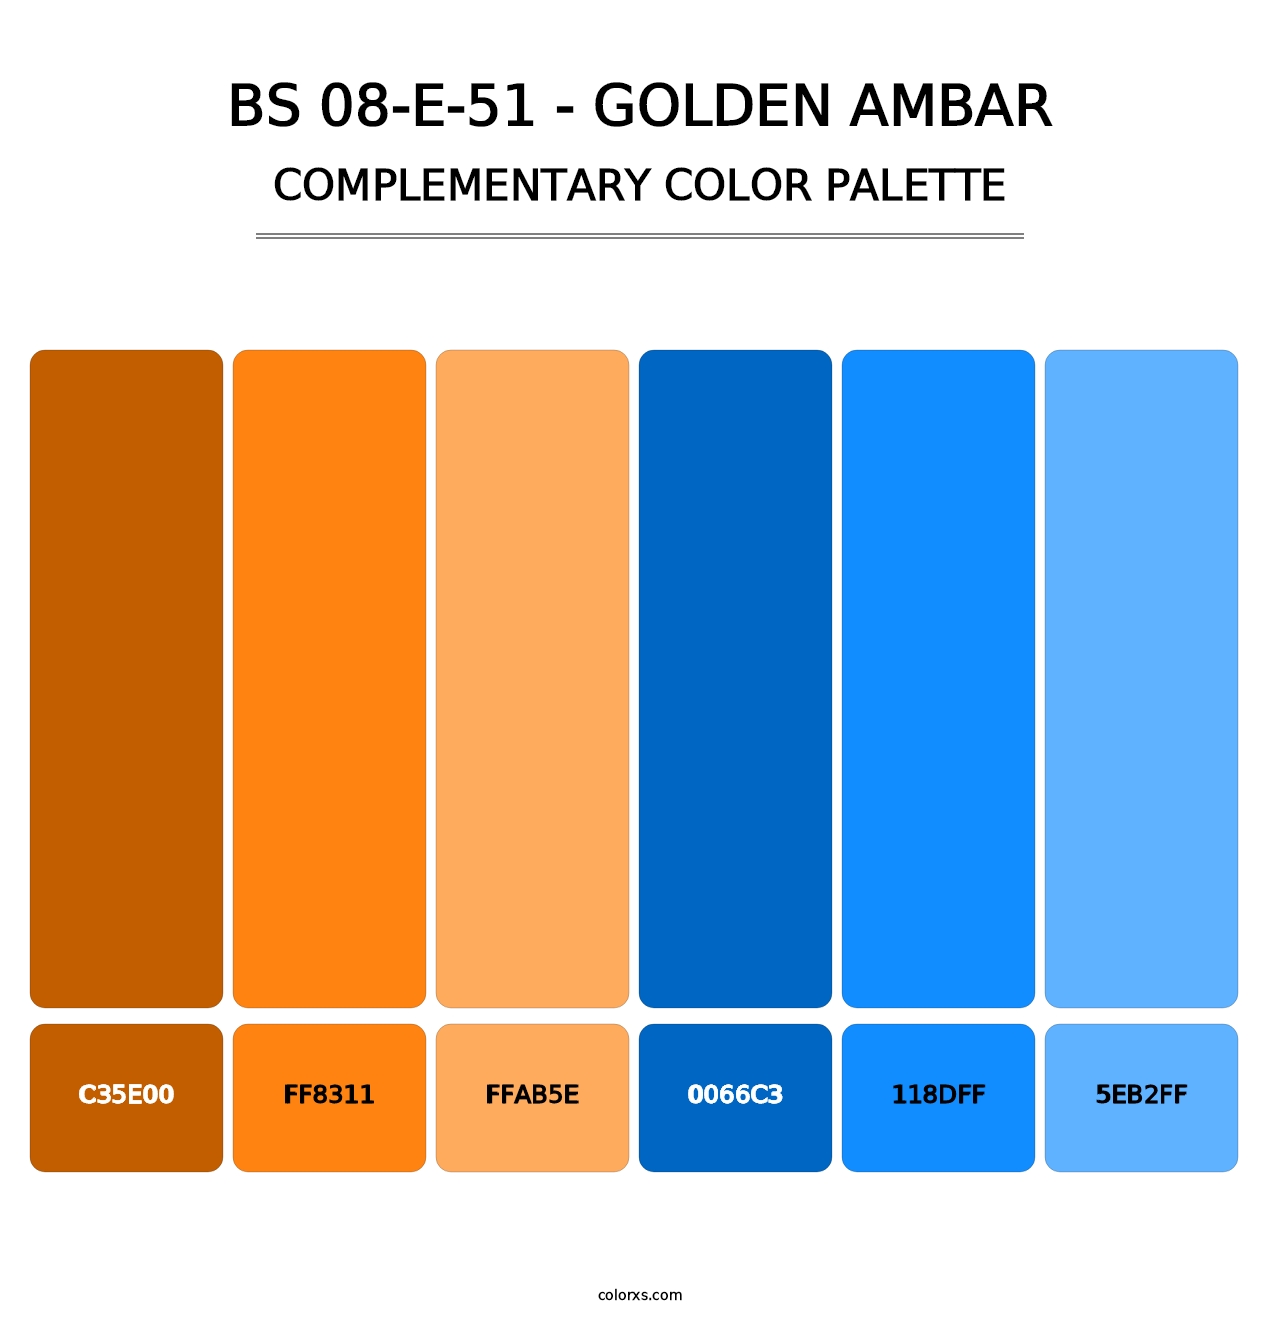 BS 08-E-51 - Golden Ambar - Complementary Color Palette